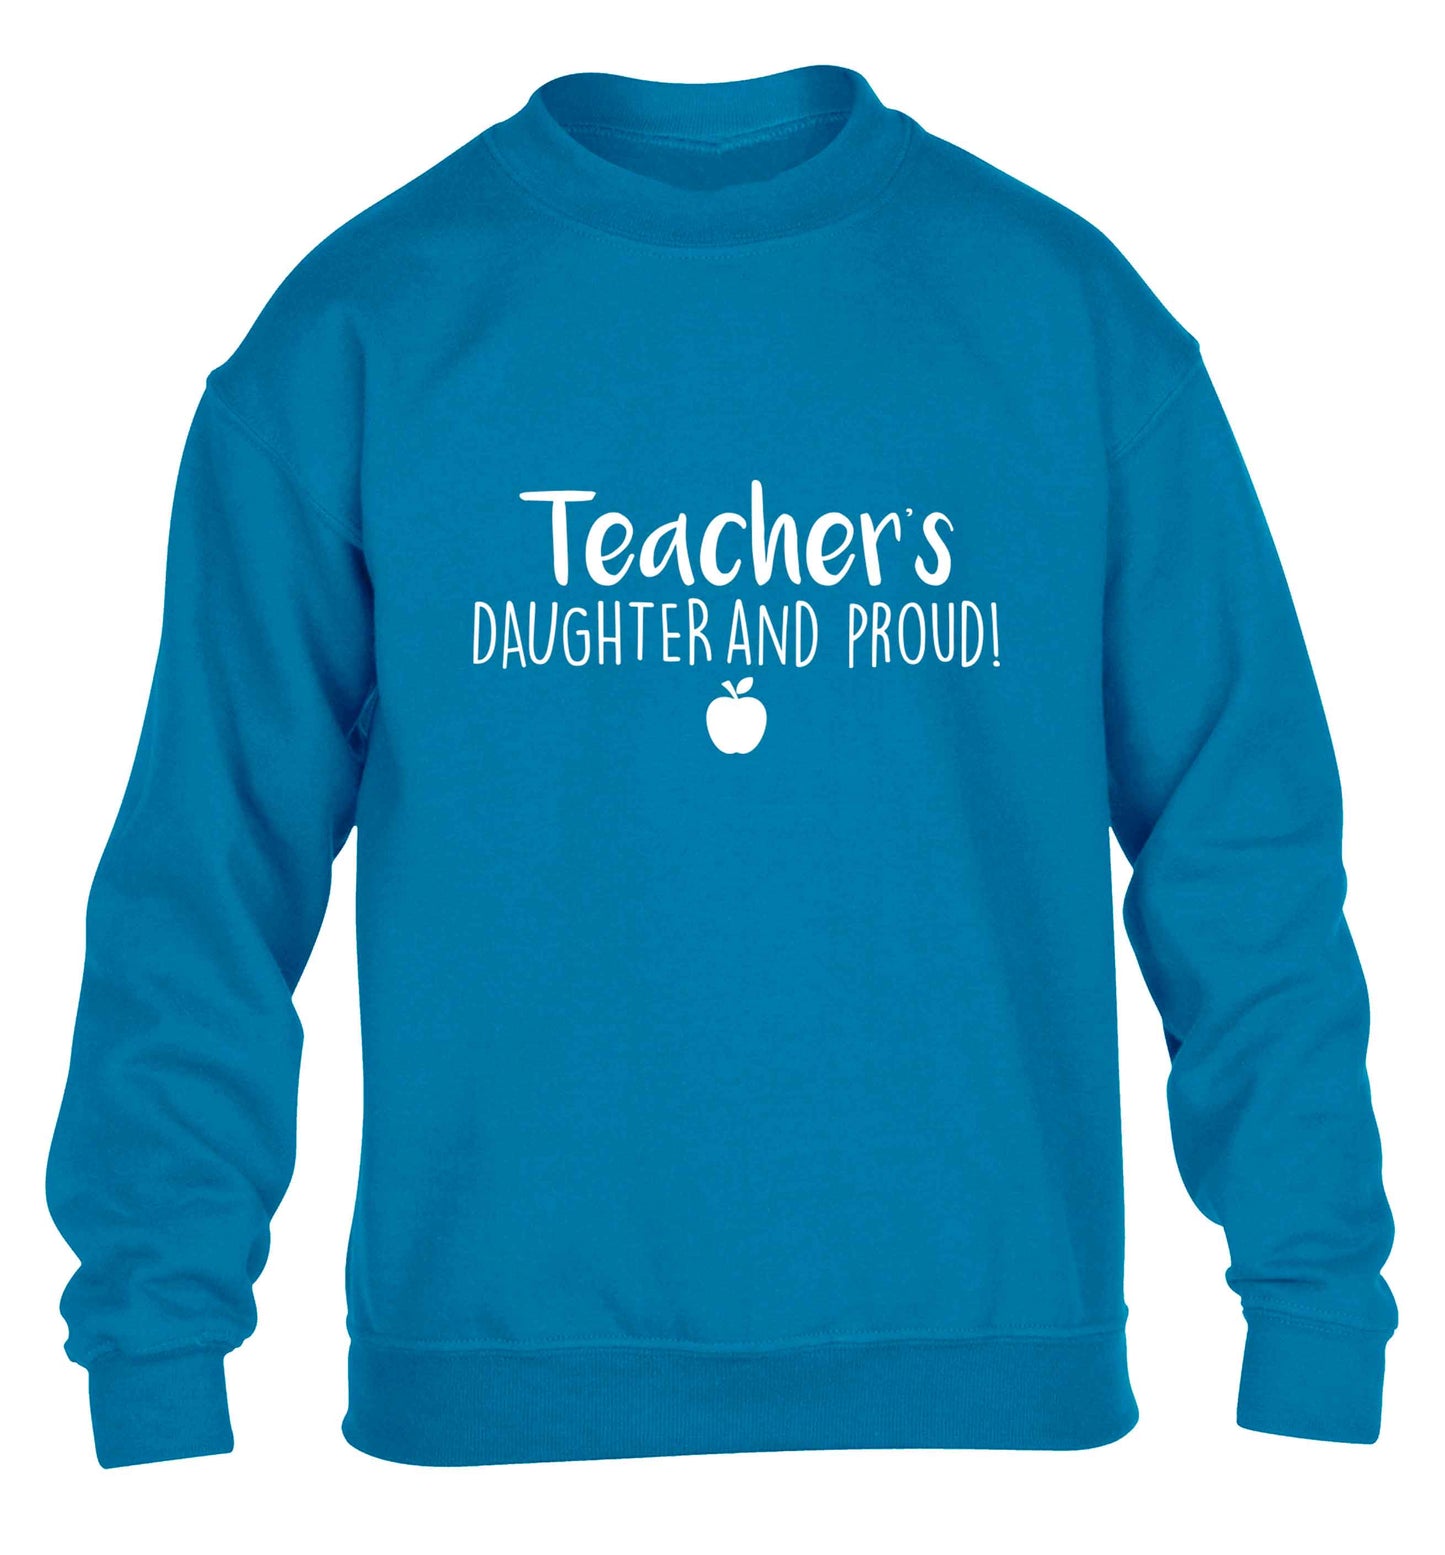 Teachers daughter and proud children's blue sweater 12-13 Years